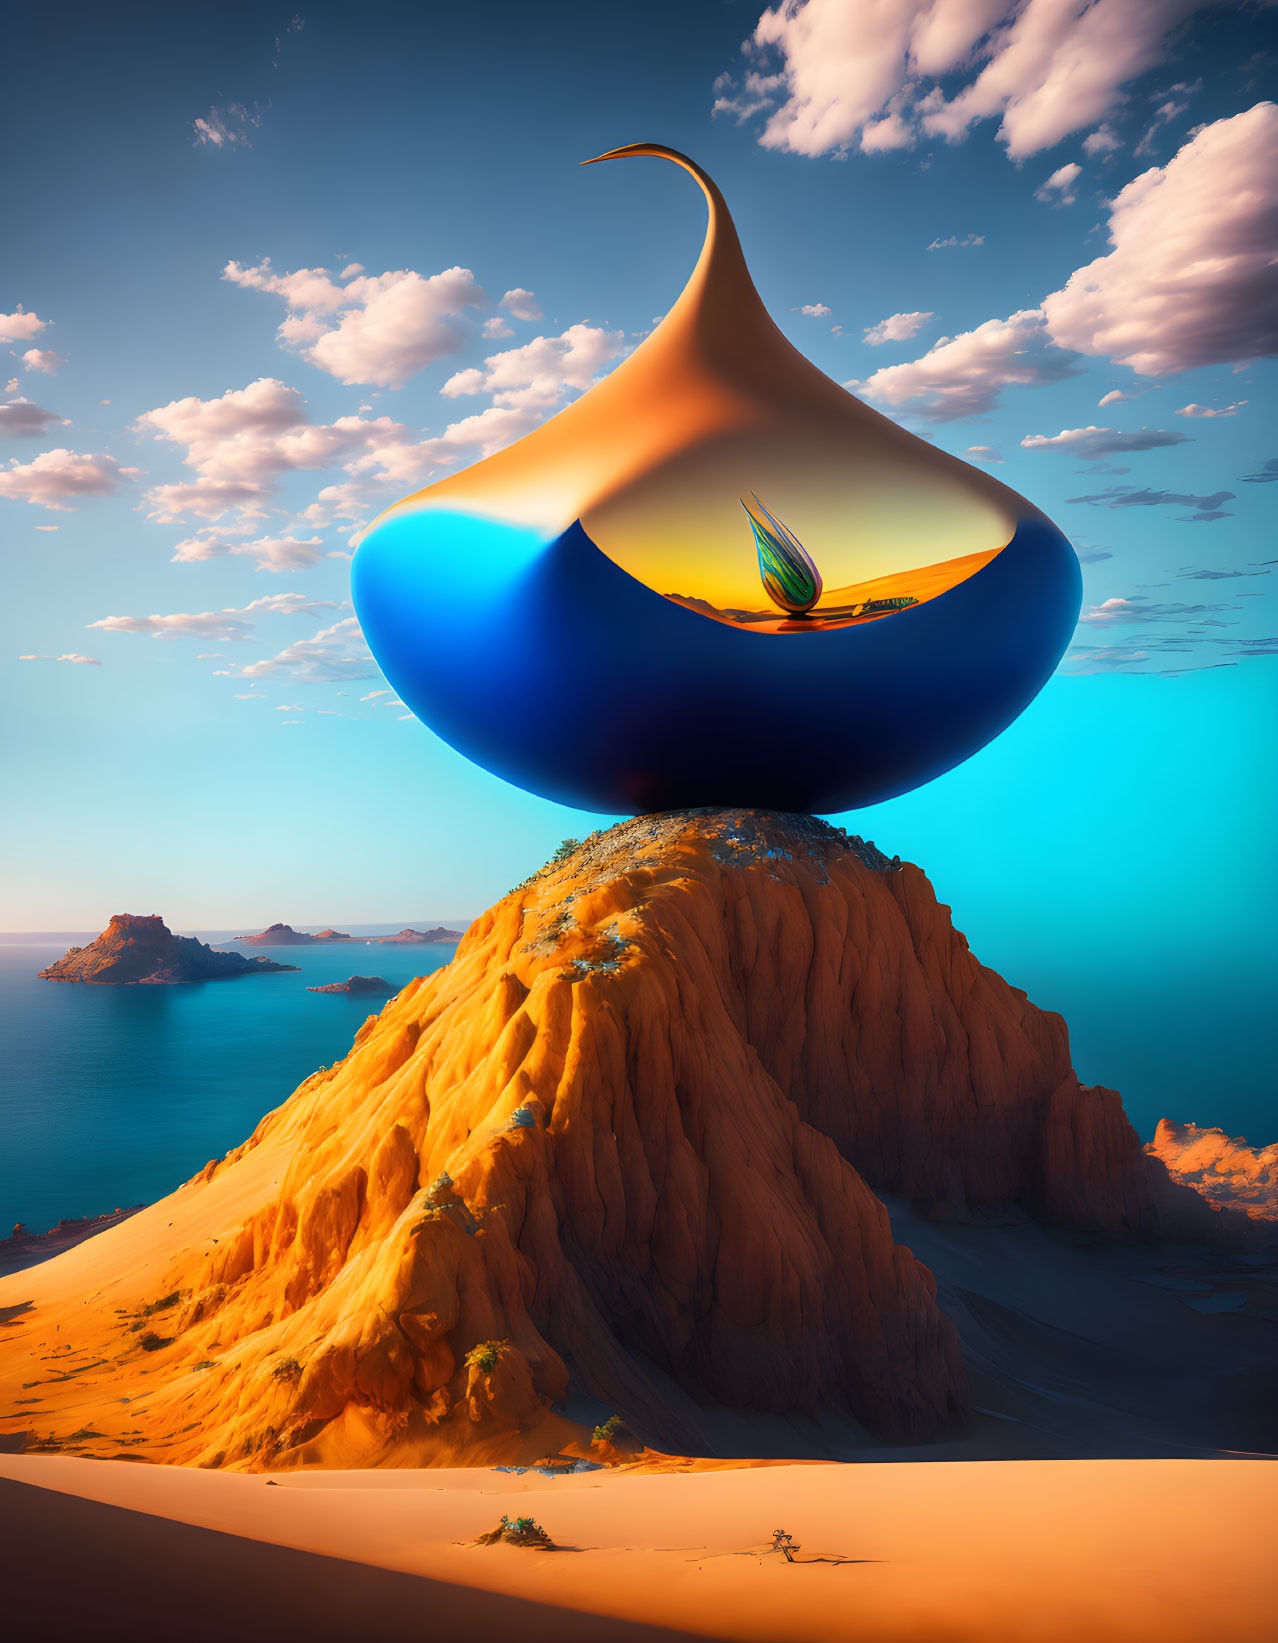 Surreal image of blue and gold genie lamp on orange cliff by serene sea